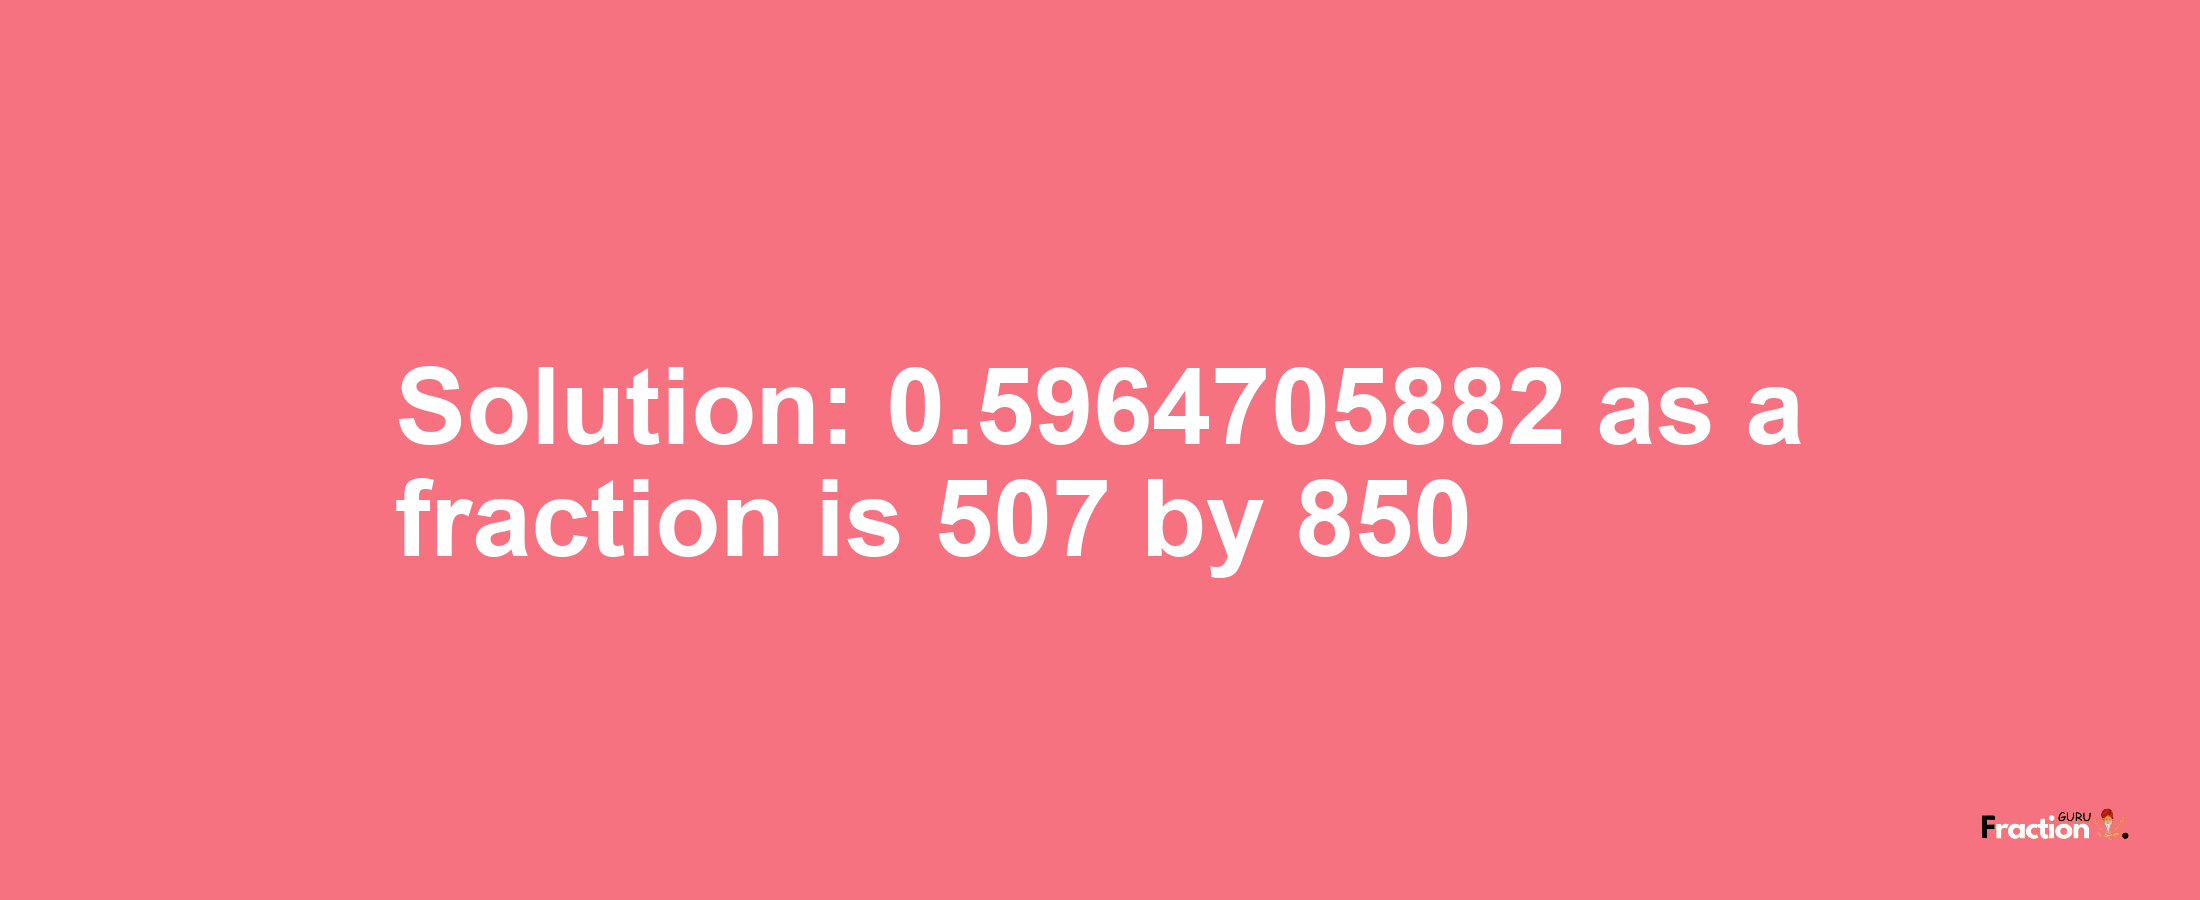 Solution:0.5964705882 as a fraction is 507/850